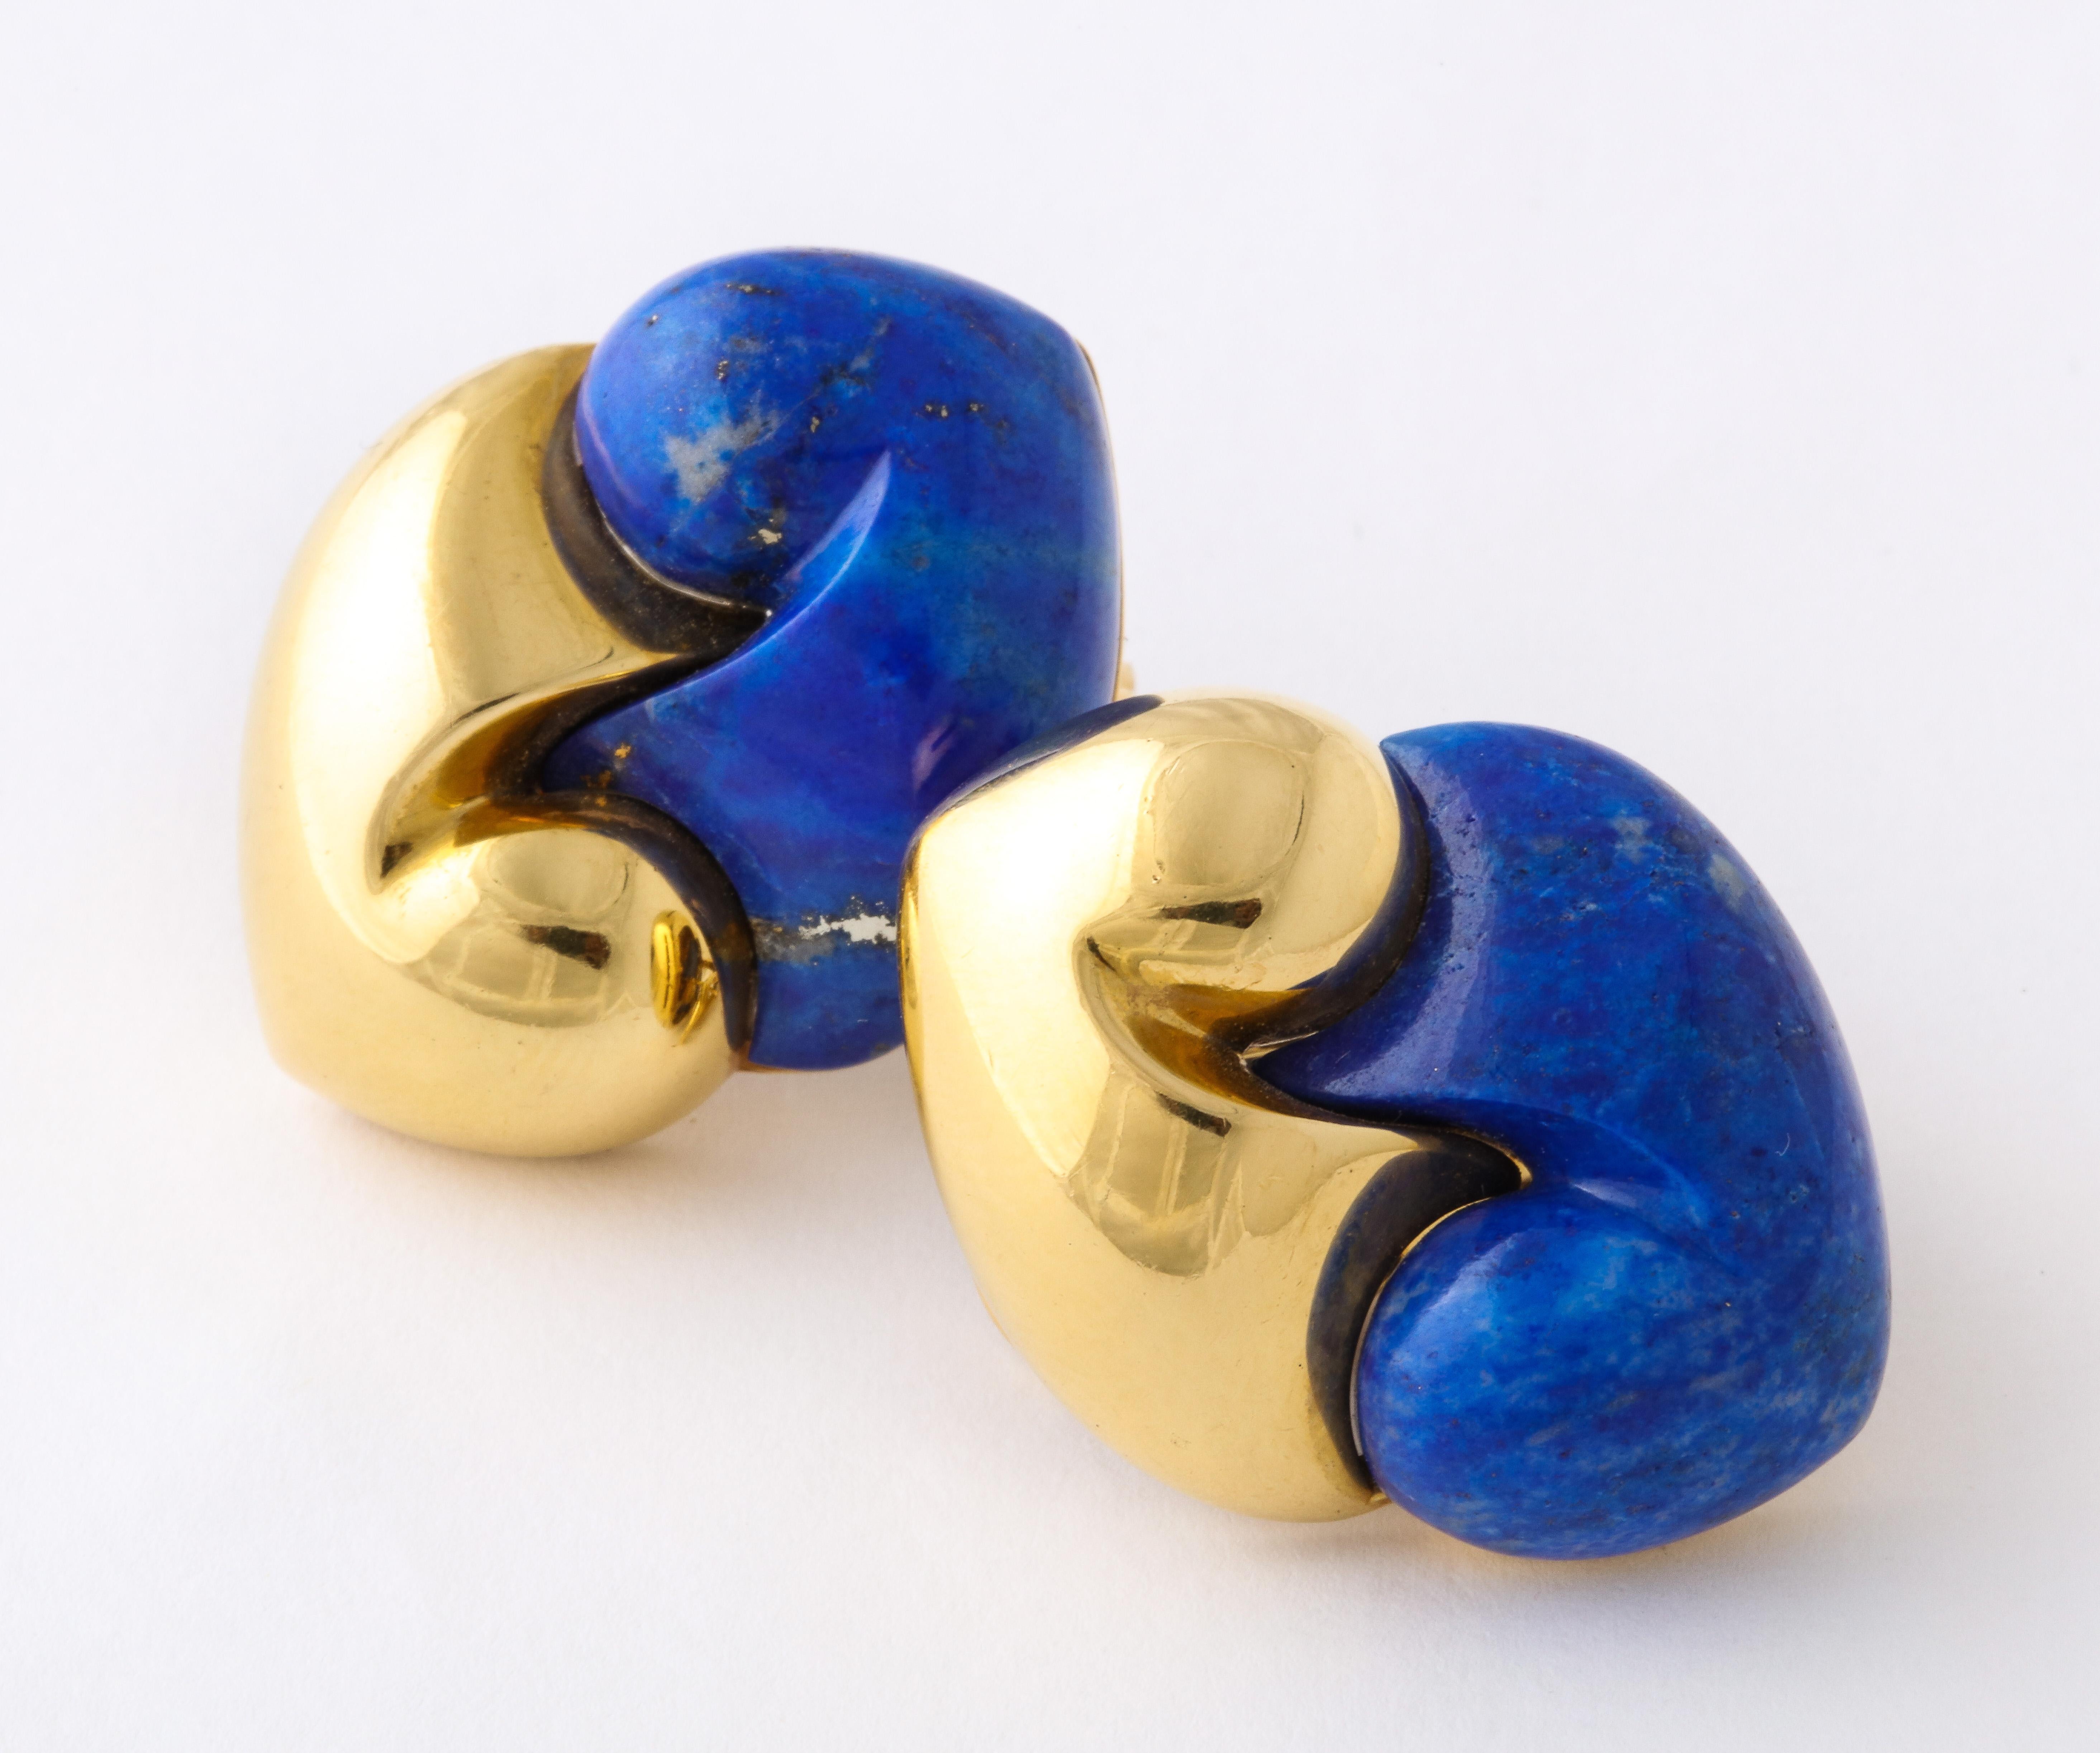 Chantecler Lapis Lazuli Gold Ear Clips In Excellent Condition For Sale In New York, NY